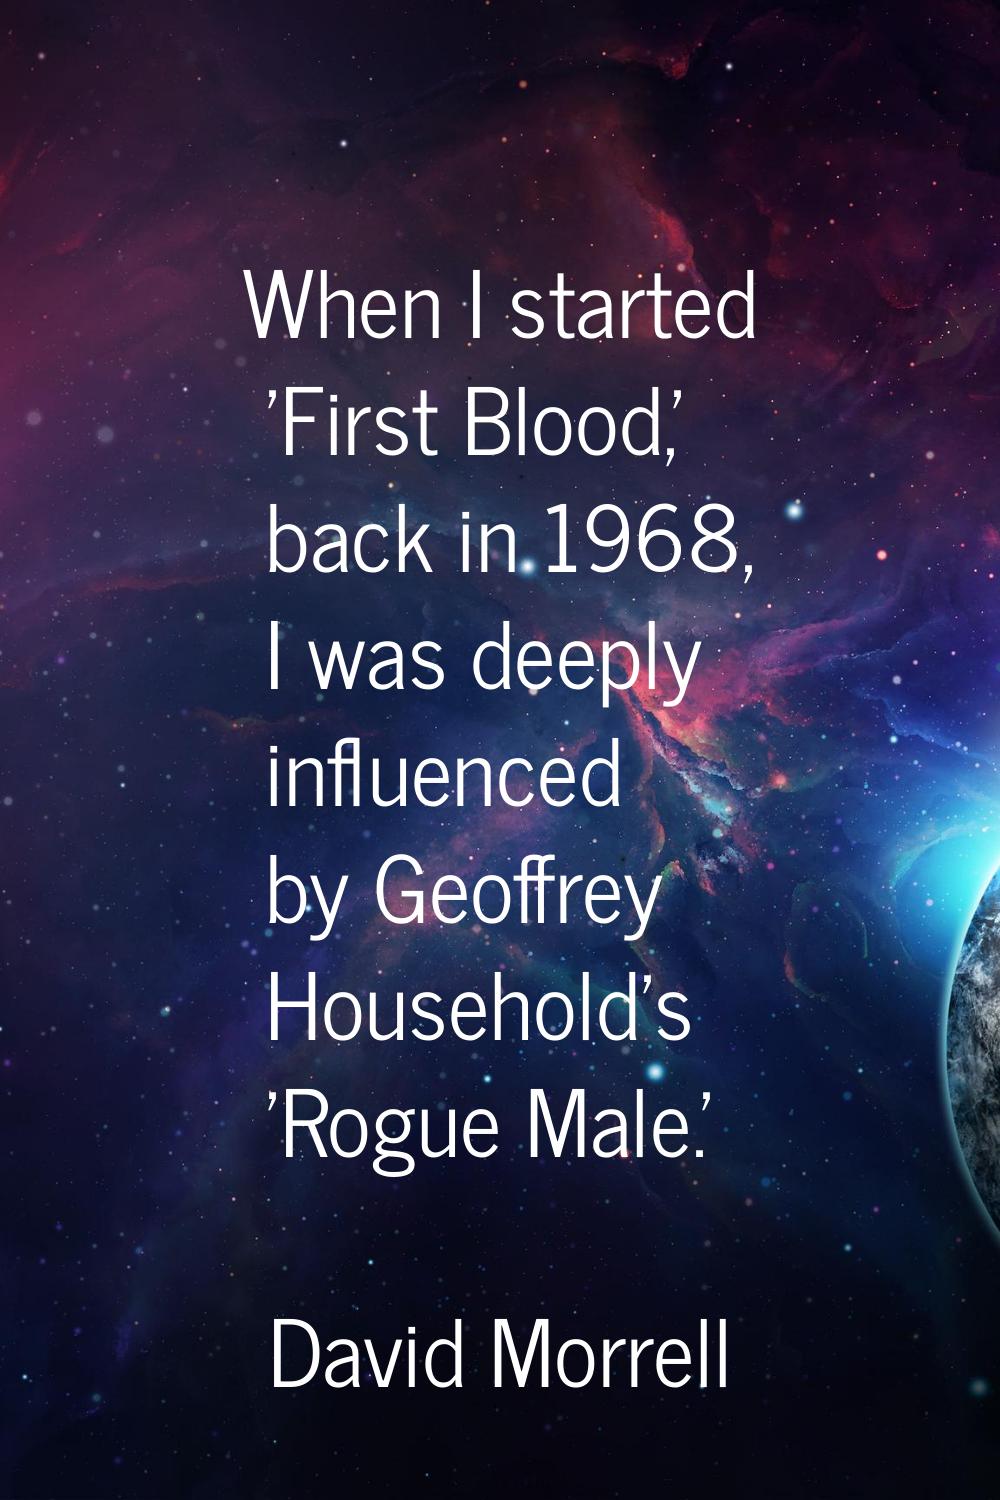 When I started 'First Blood,' back in 1968, I was deeply influenced by Geoffrey Household's 'Rogue 